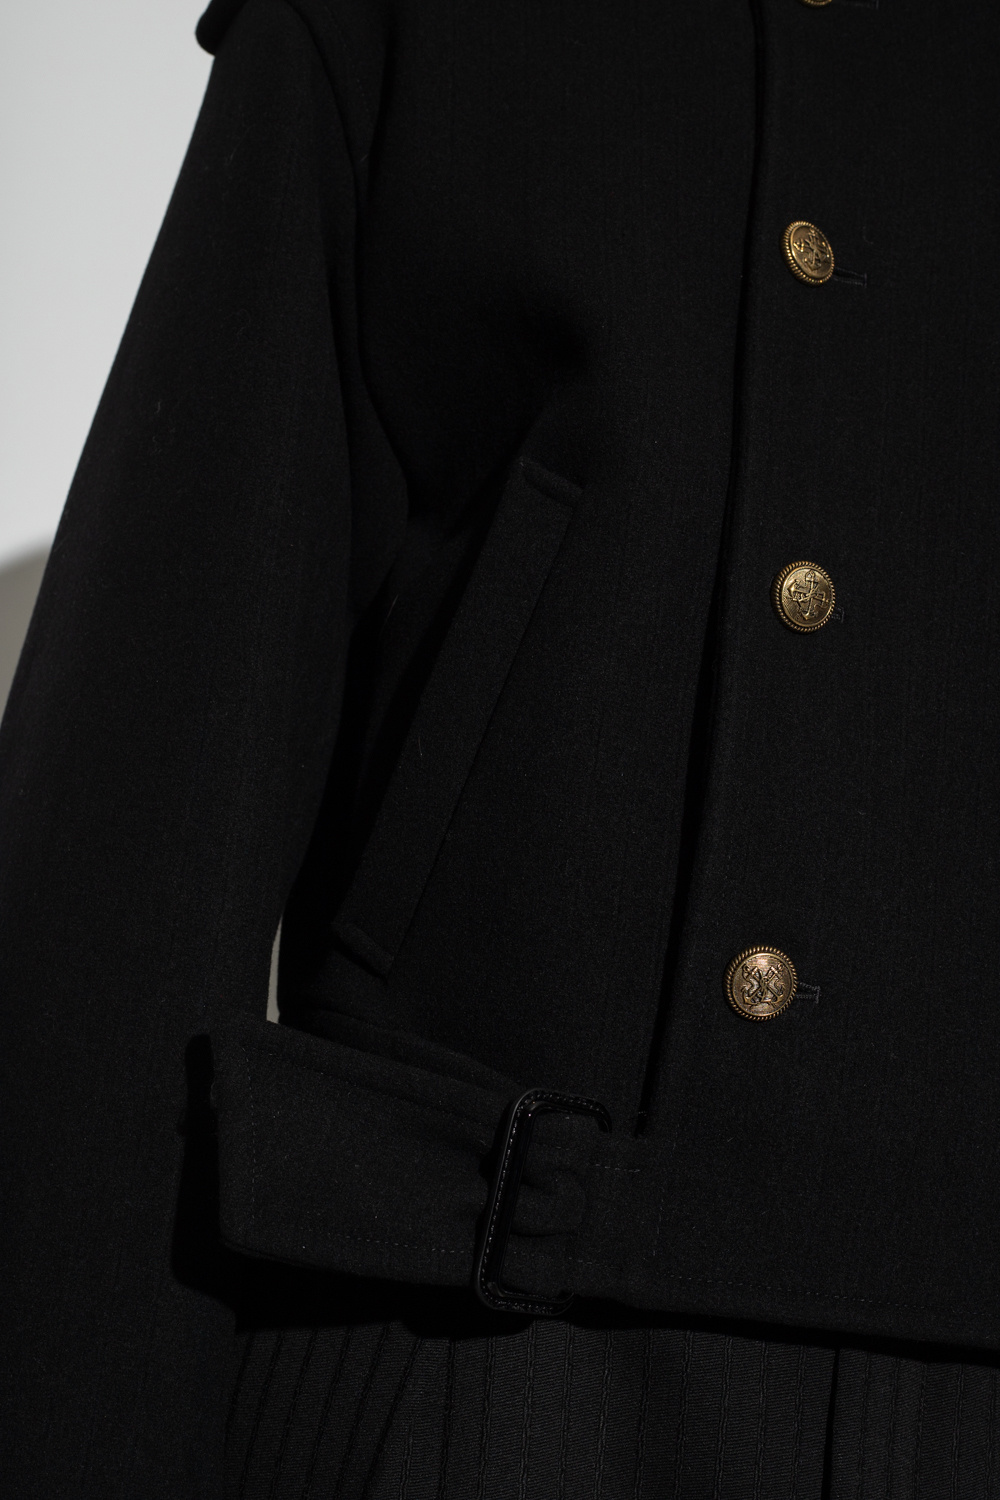 Saint Laurent Double-breasted jacket with epaulettes